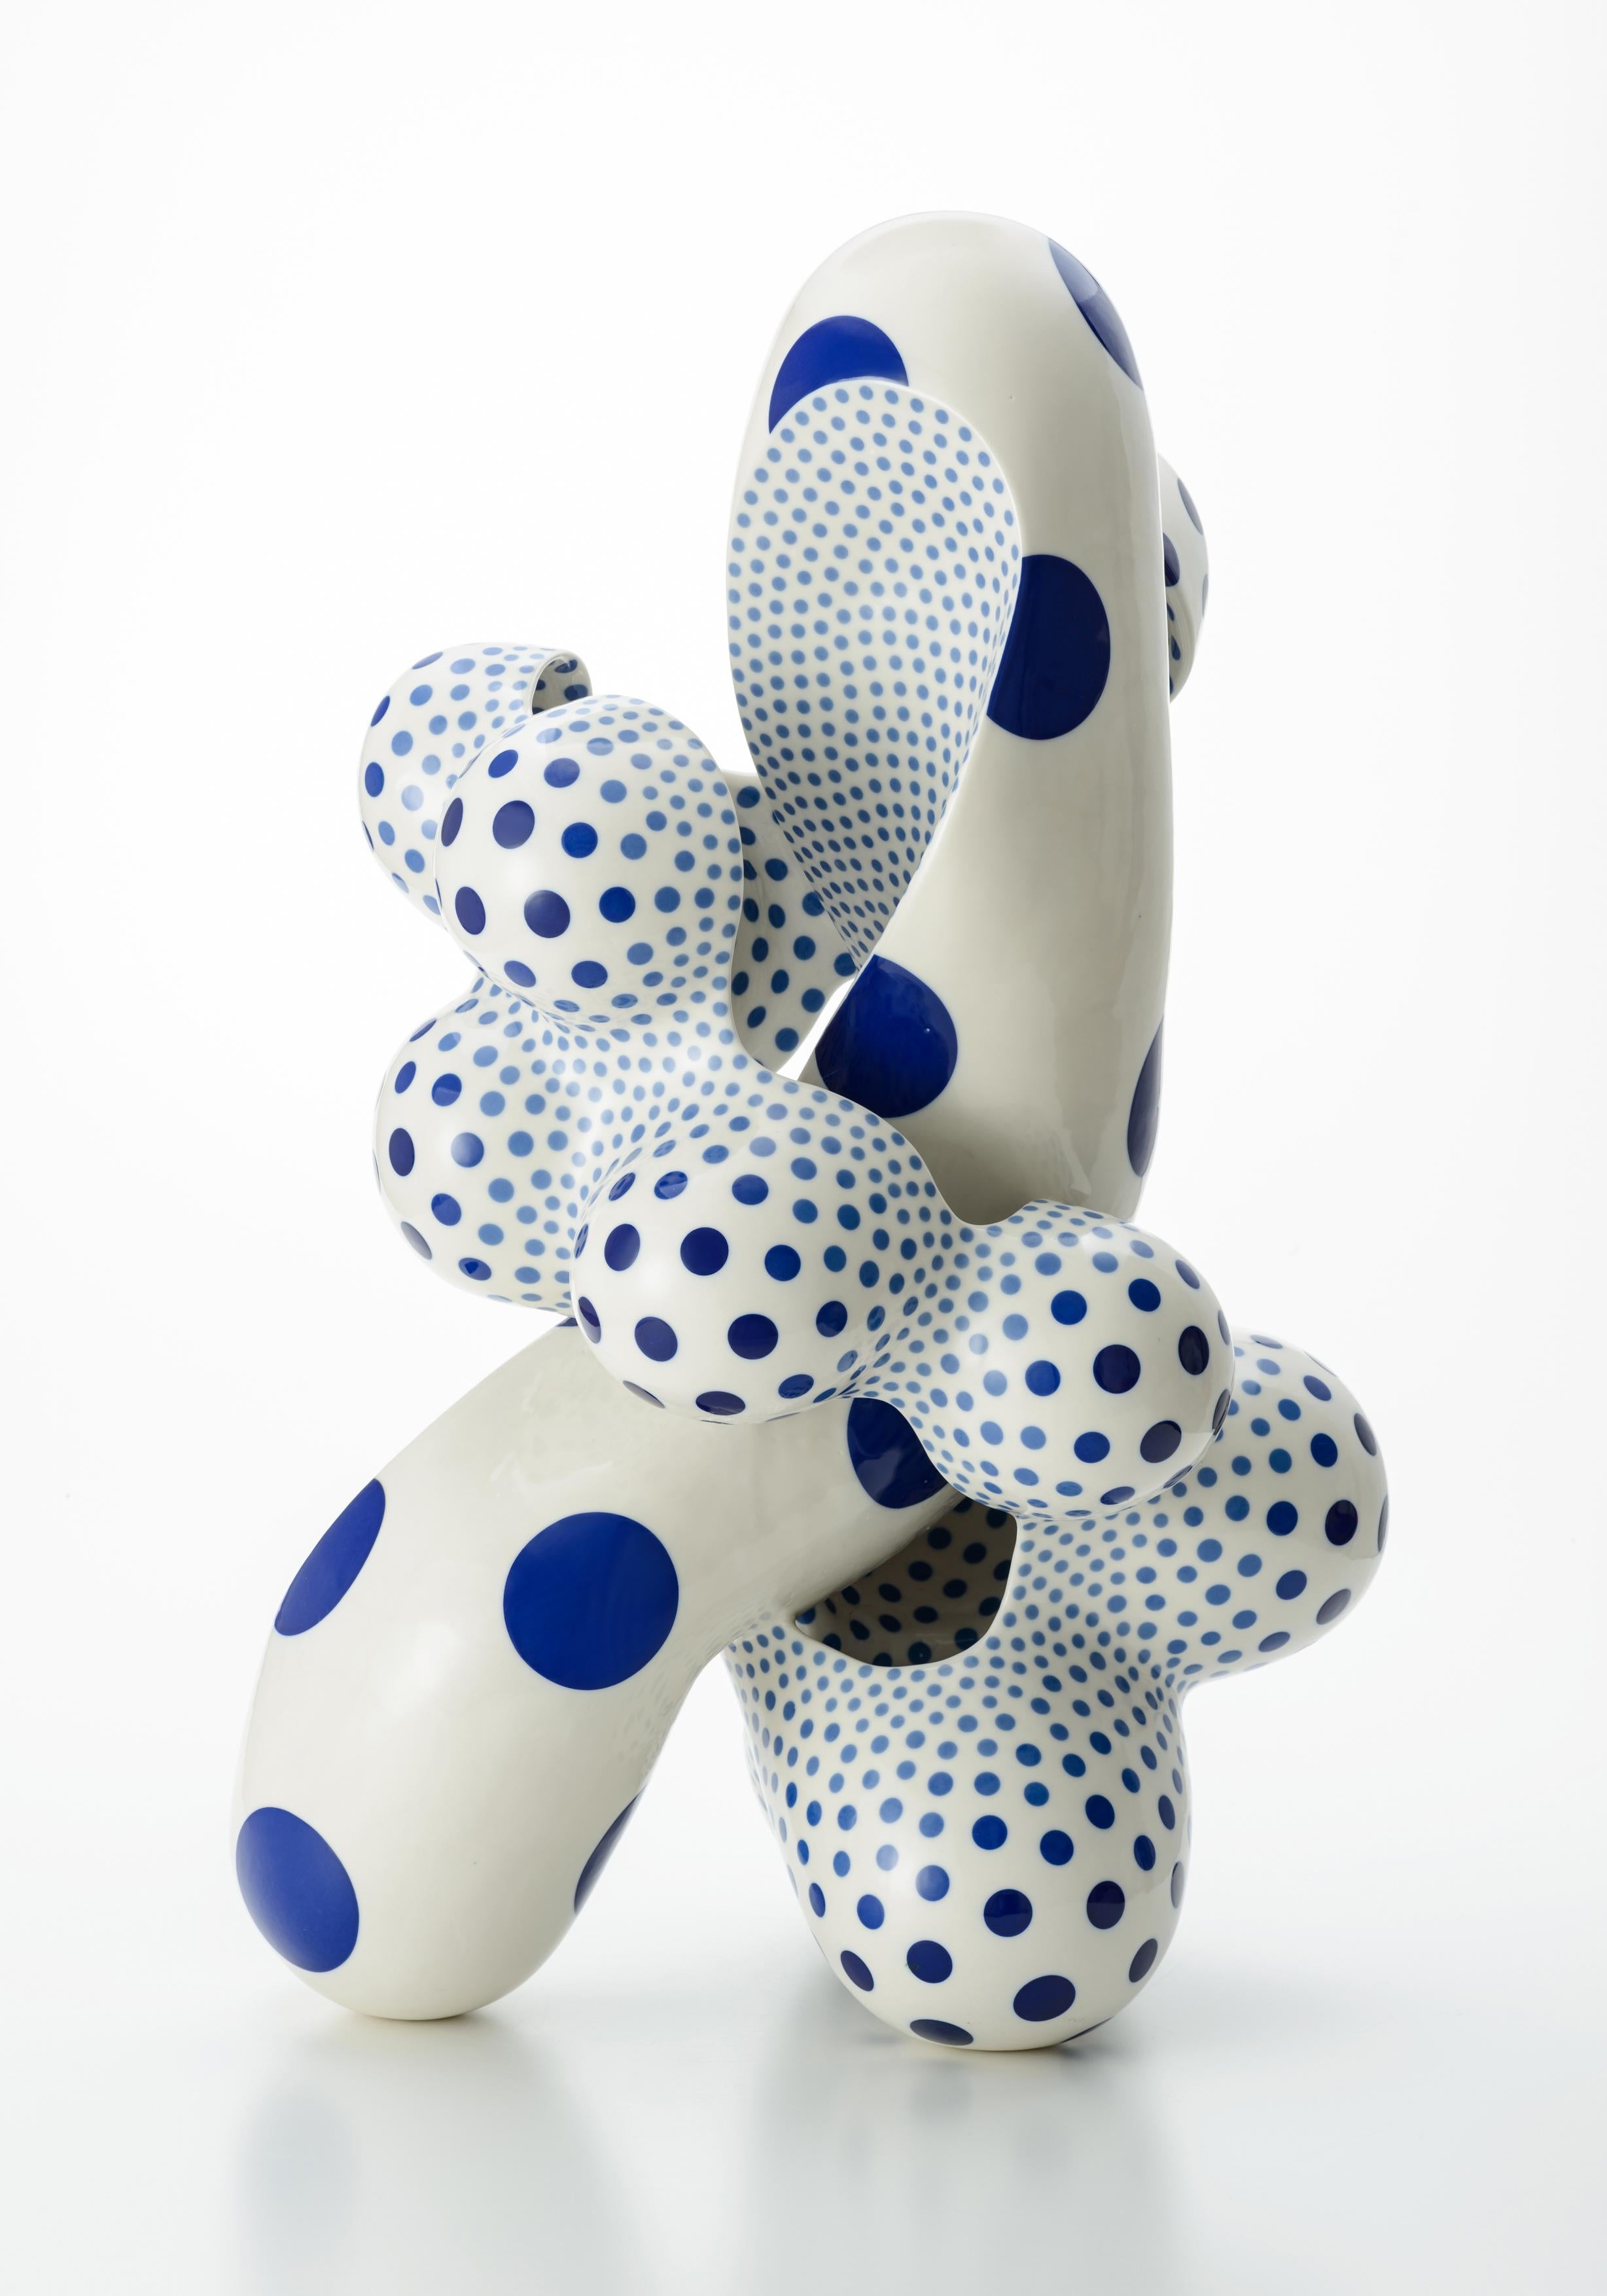 Japanese artist Harumi Nakashima creates free-form ceramic sculptures that feature organic, yet psychedelic characteristics. Nakashima, mostly known for beautifully structured, odd geometric shapes embellished with iconic polka dots, works with a